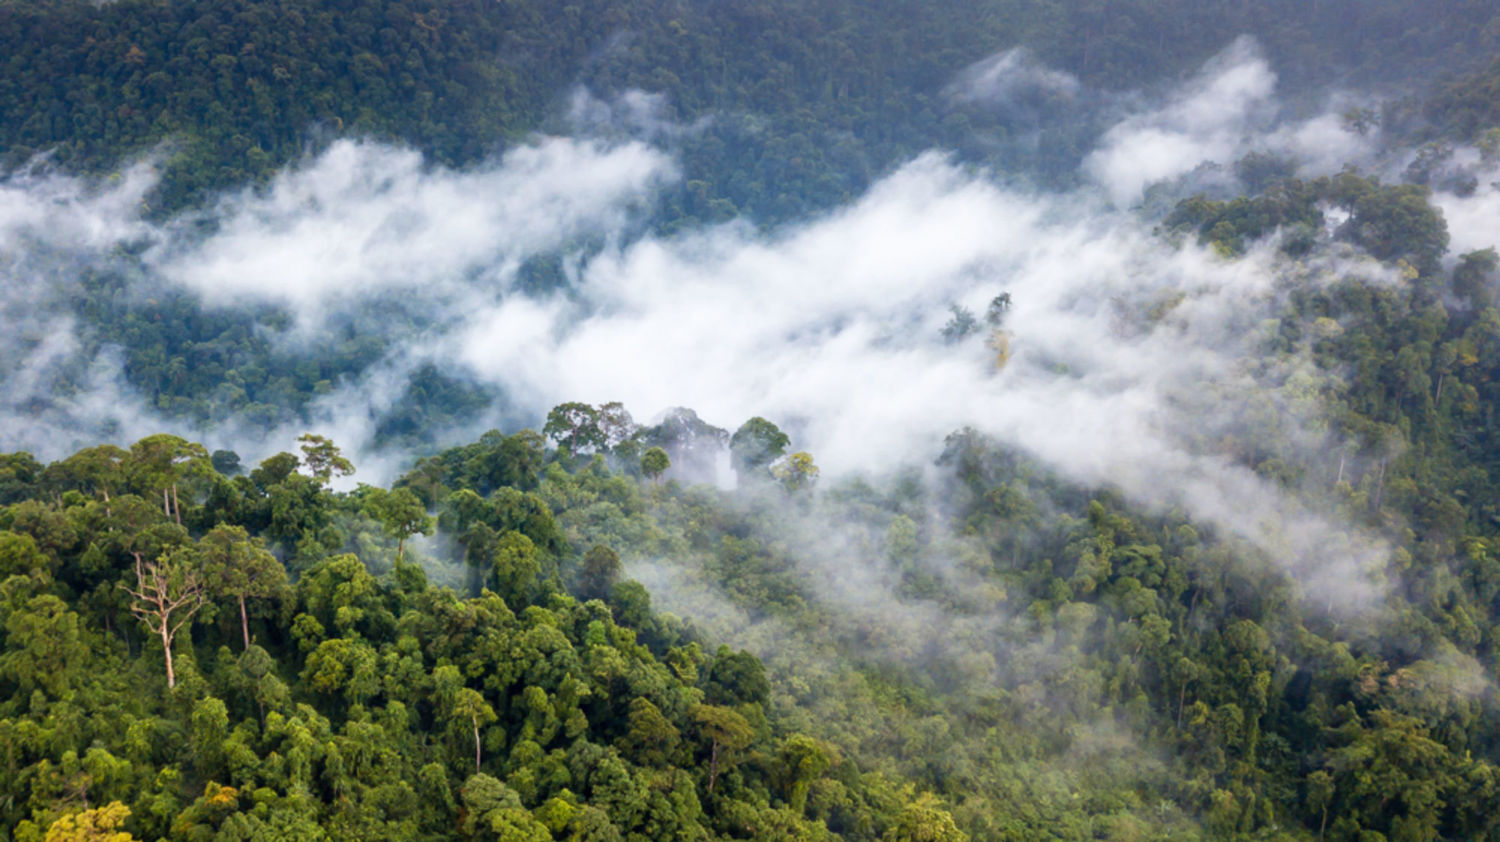 Moisture produced by the world's forests generates rainfall thousands of miles away.